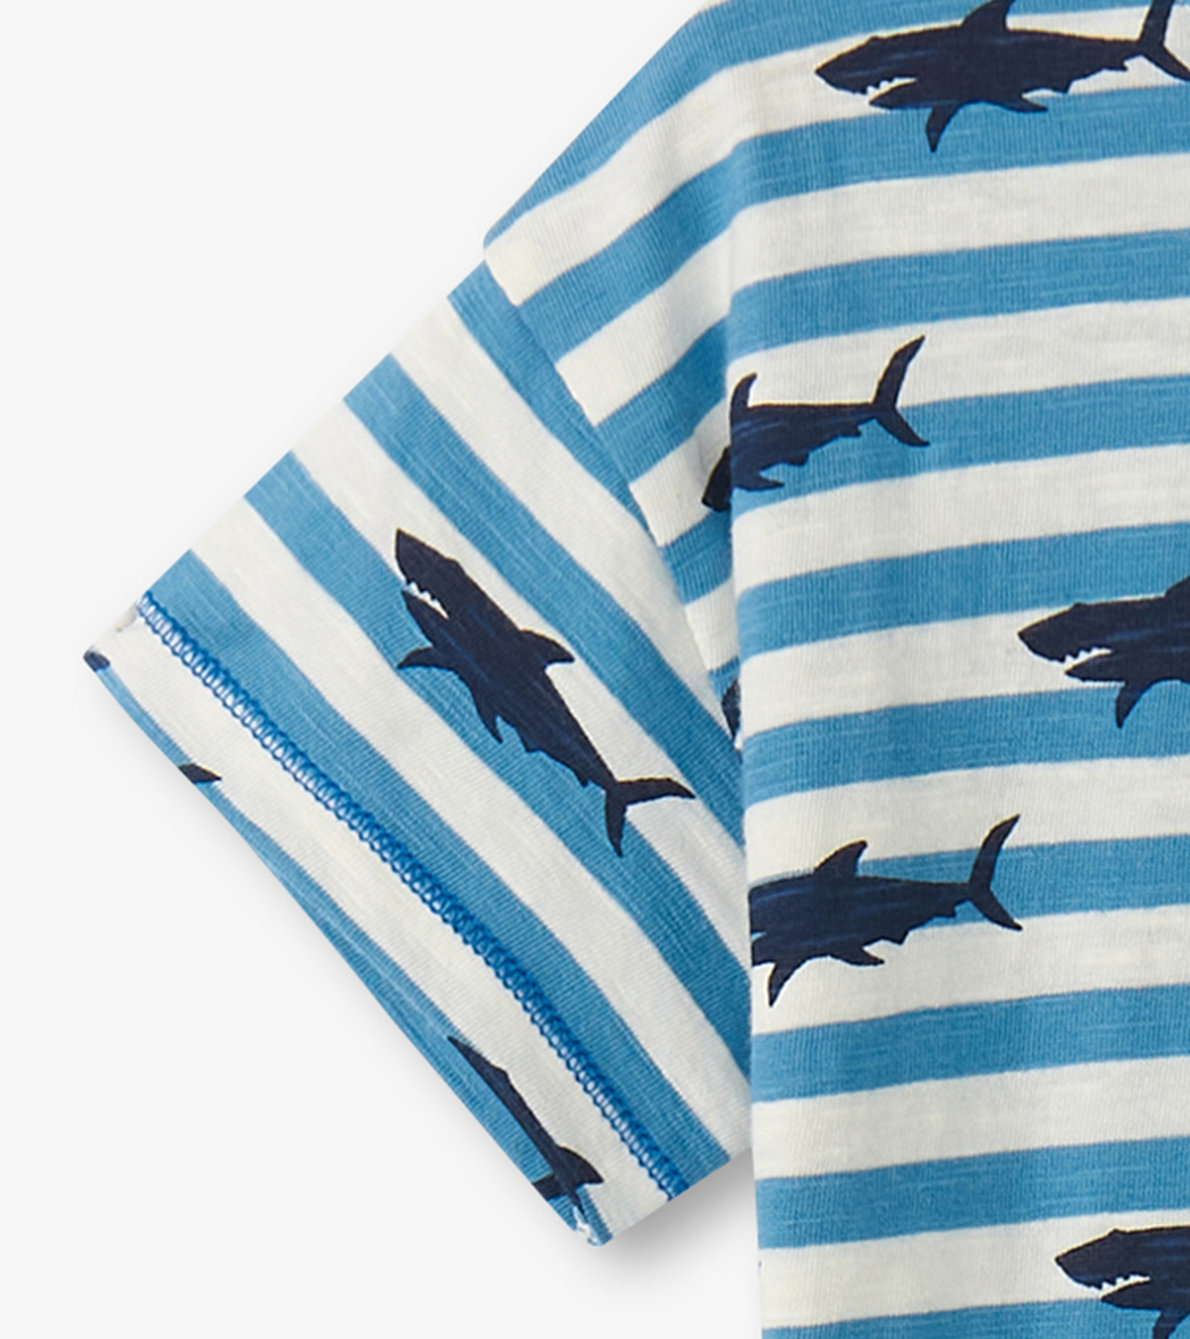 View larger image of Baby & Toddler Boys Shark Stripes Slouchy Tee